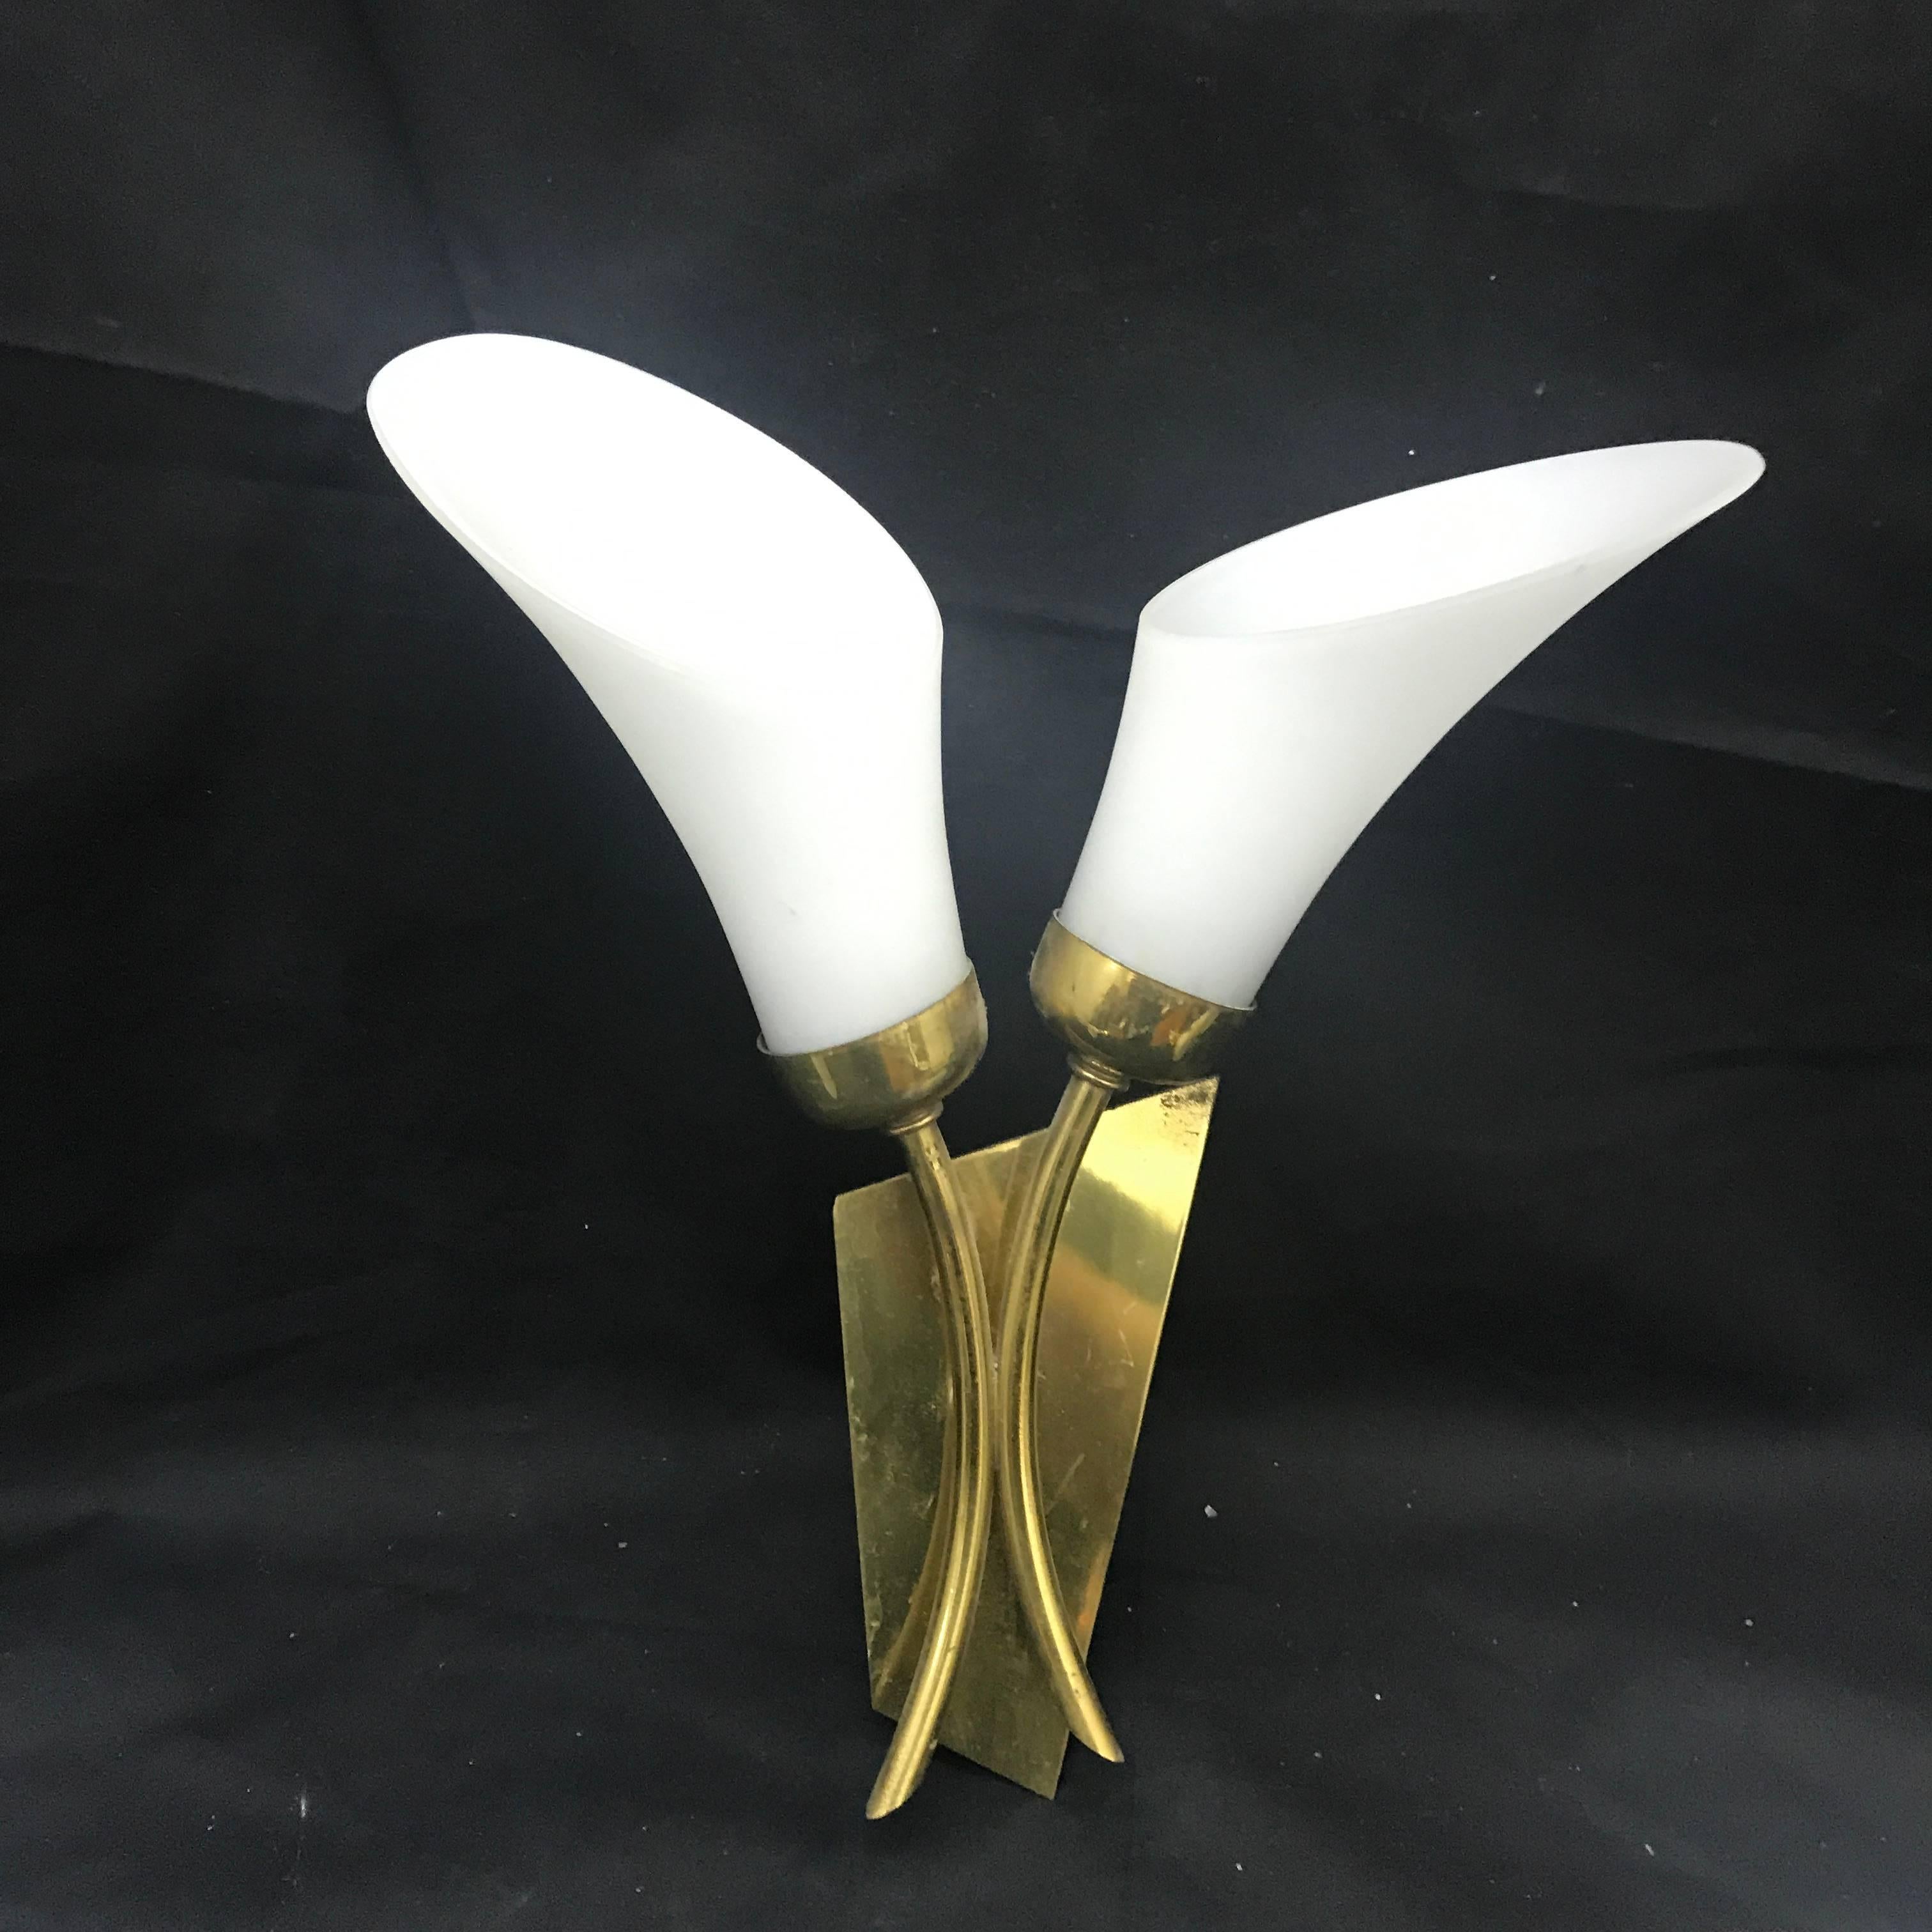 Brass and white glass wall sconces, made in Italy in the 1950s, good conditions overall. They work both 110-240 volts and need two regular e 14 bulbs, price is for one sconce.